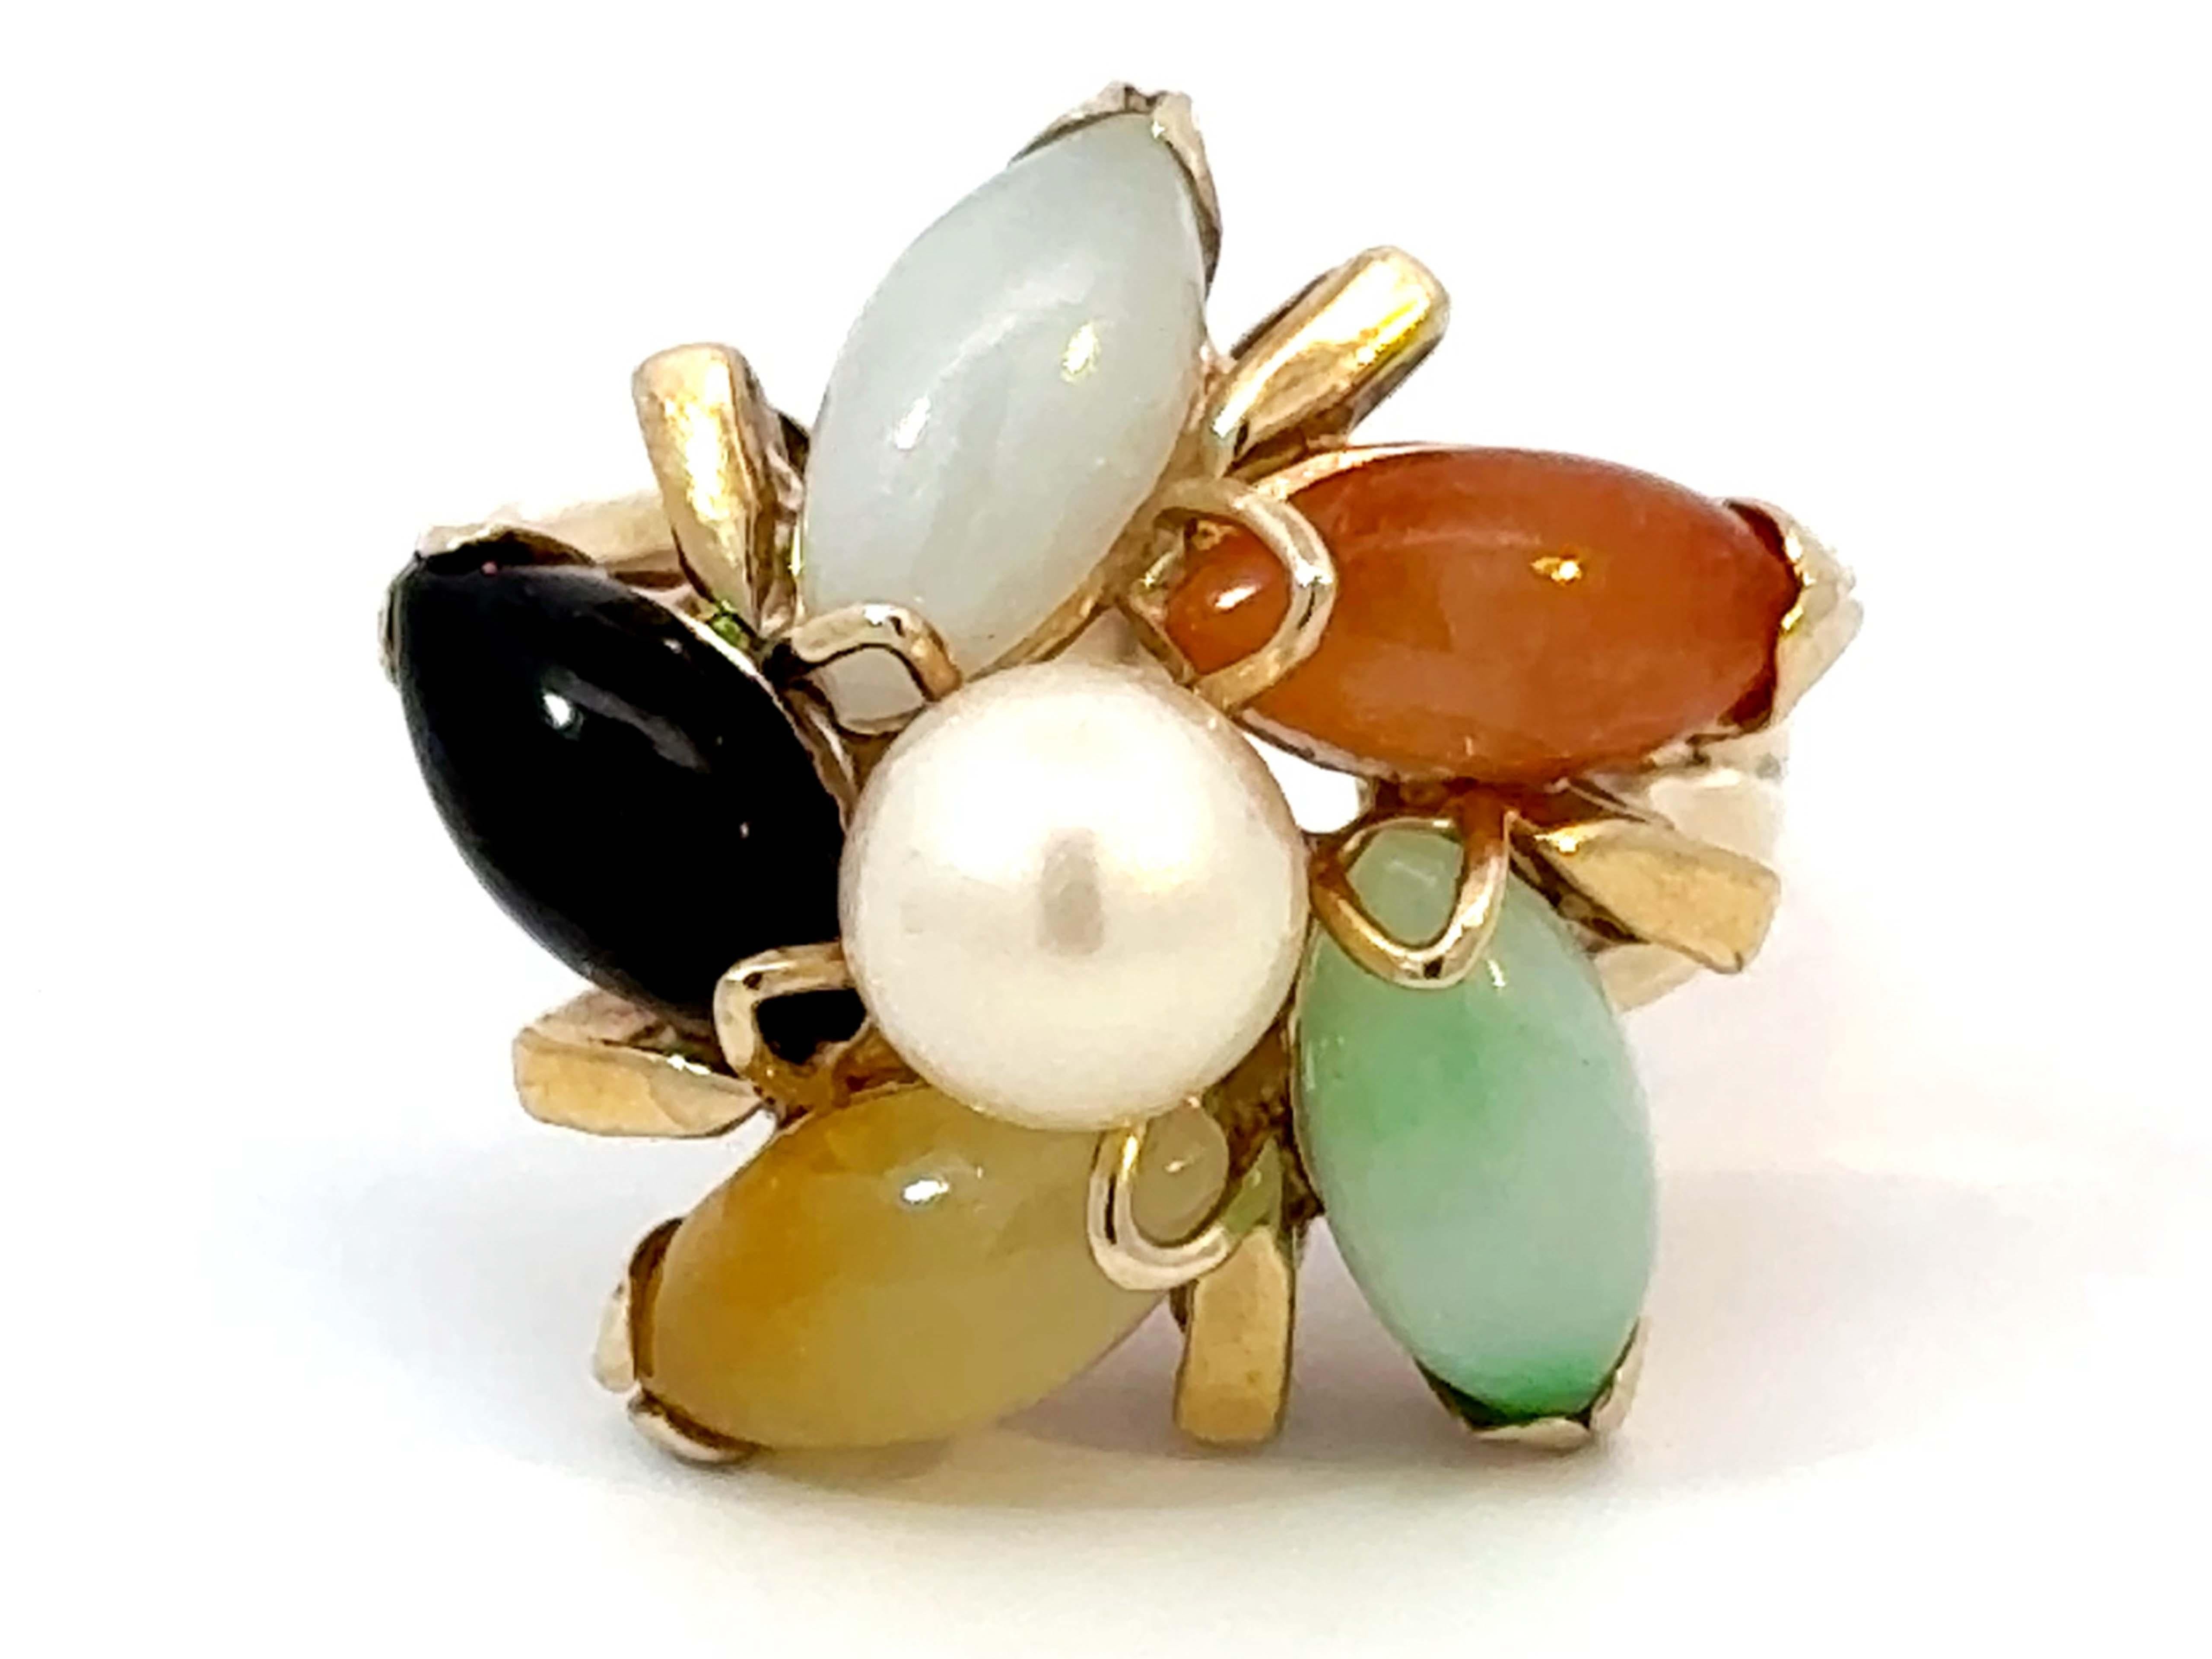 Item Specifications:

Metal: 14k Yellow Gold 

Style: Statement Ring

Ring Size: 8.5 (resizing available for a fee)

Ring Diameter: 21 mm x 20 mm

Total Weight: 8.2 Grams

Gemstone Specifications:

Gemstone: Jade and Pearl
​
​Pearl Diameter: 6.7